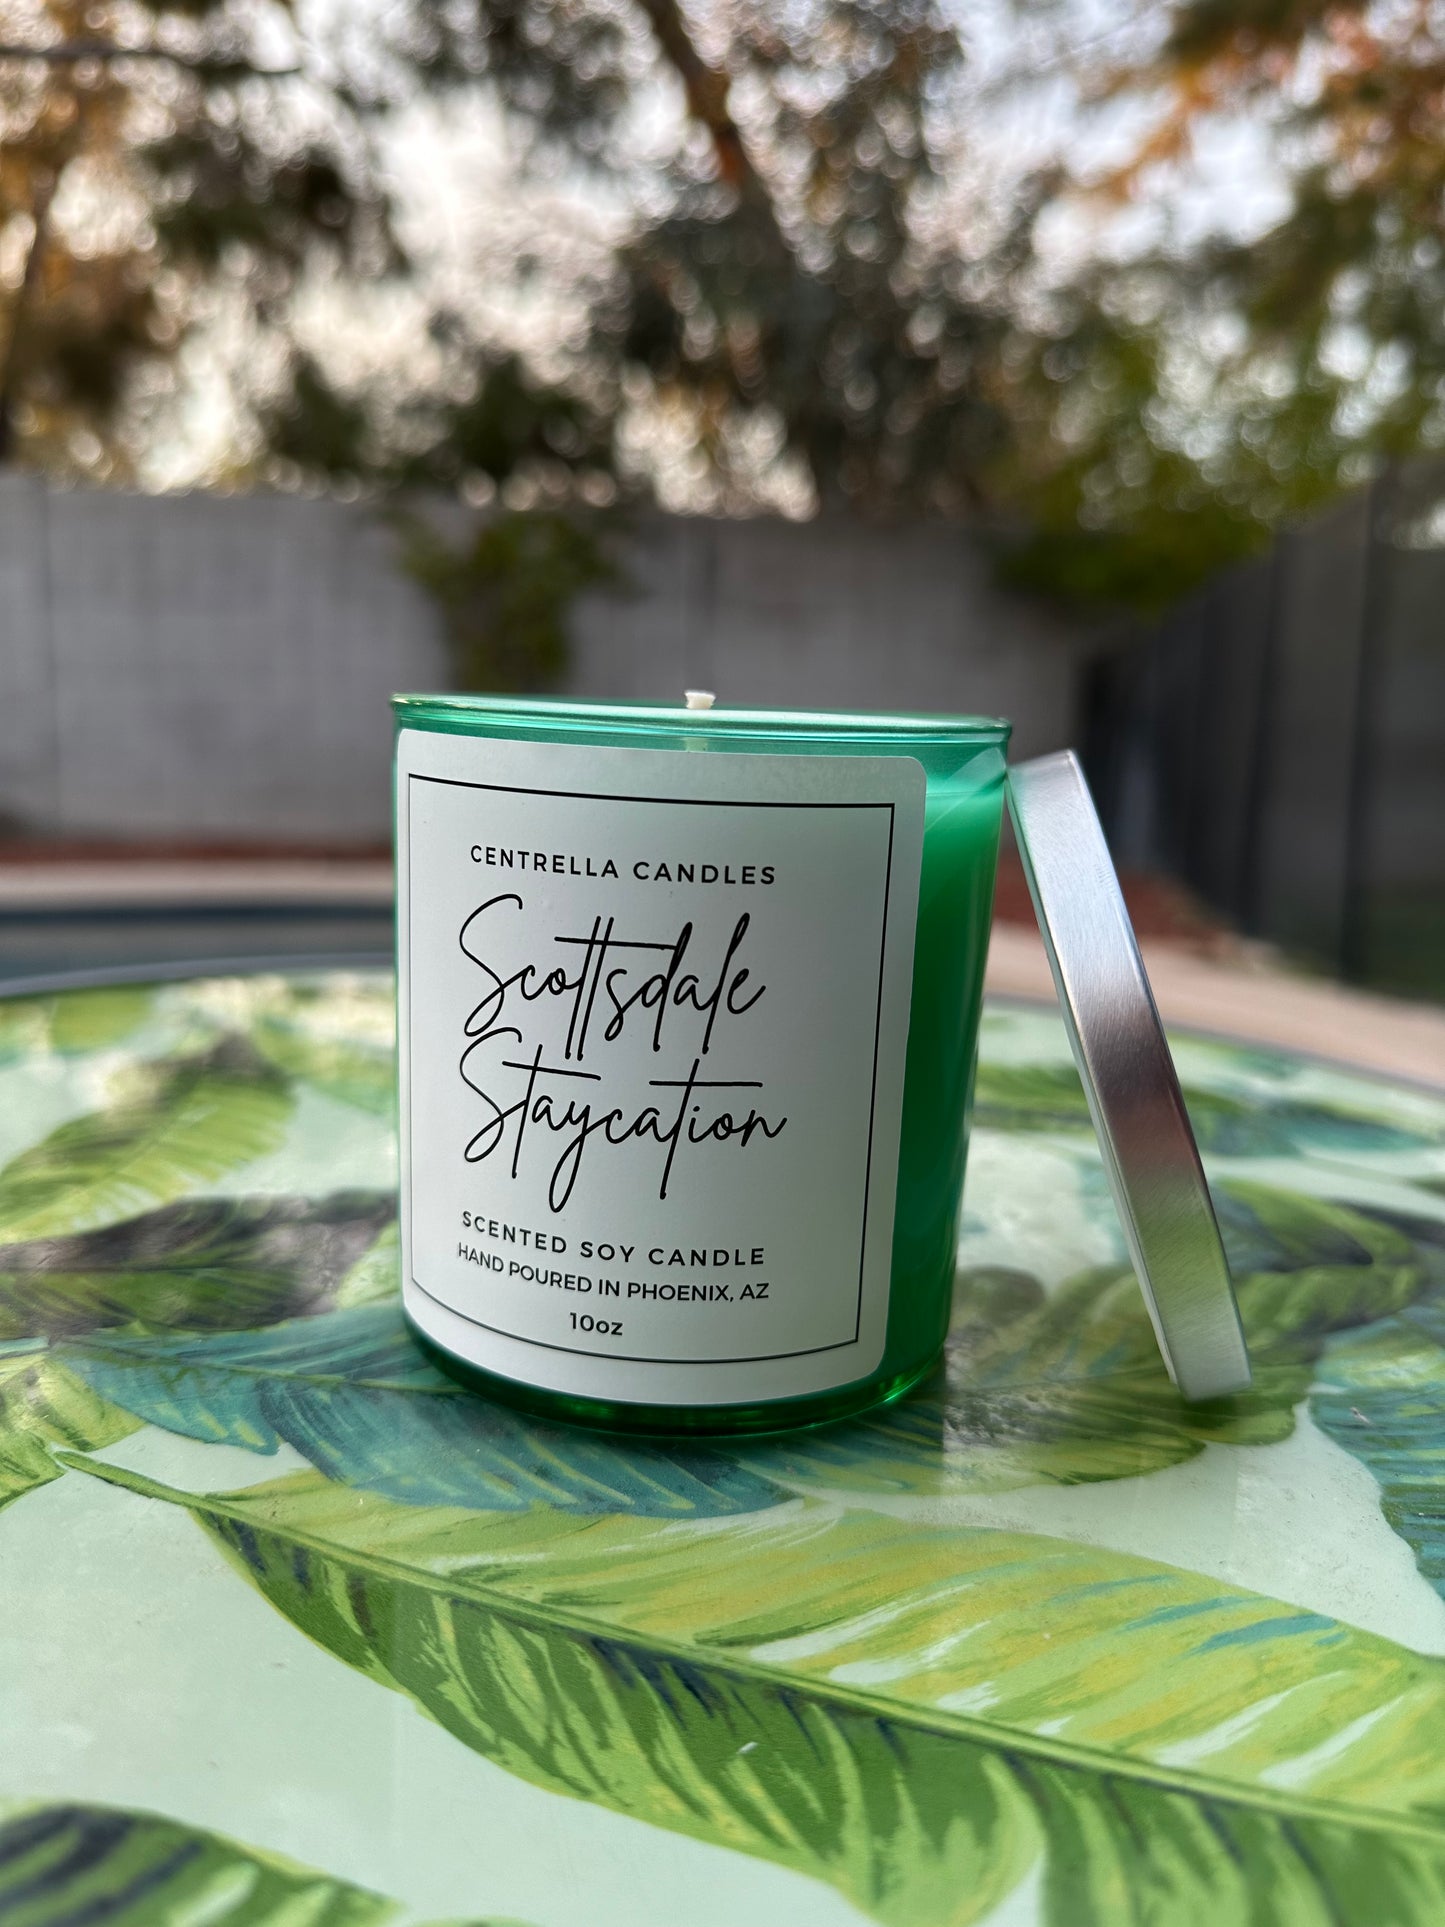 Scottsdale Staycation Soy Candle